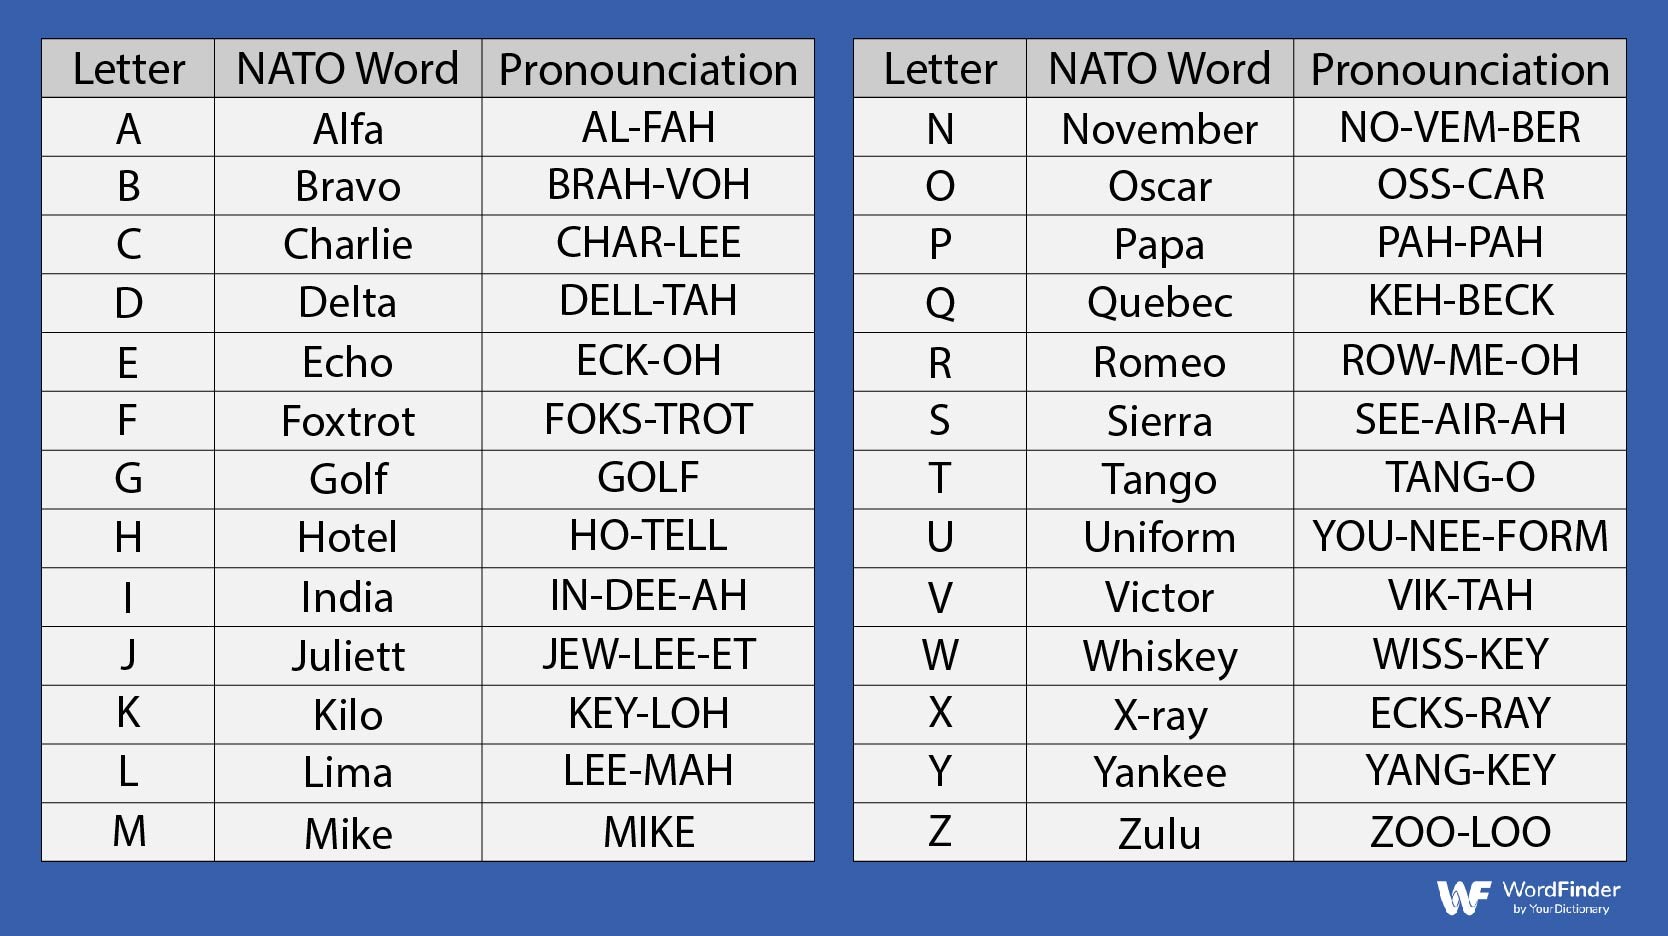 What the NATO Phonetic Alphabet Words Really Mean